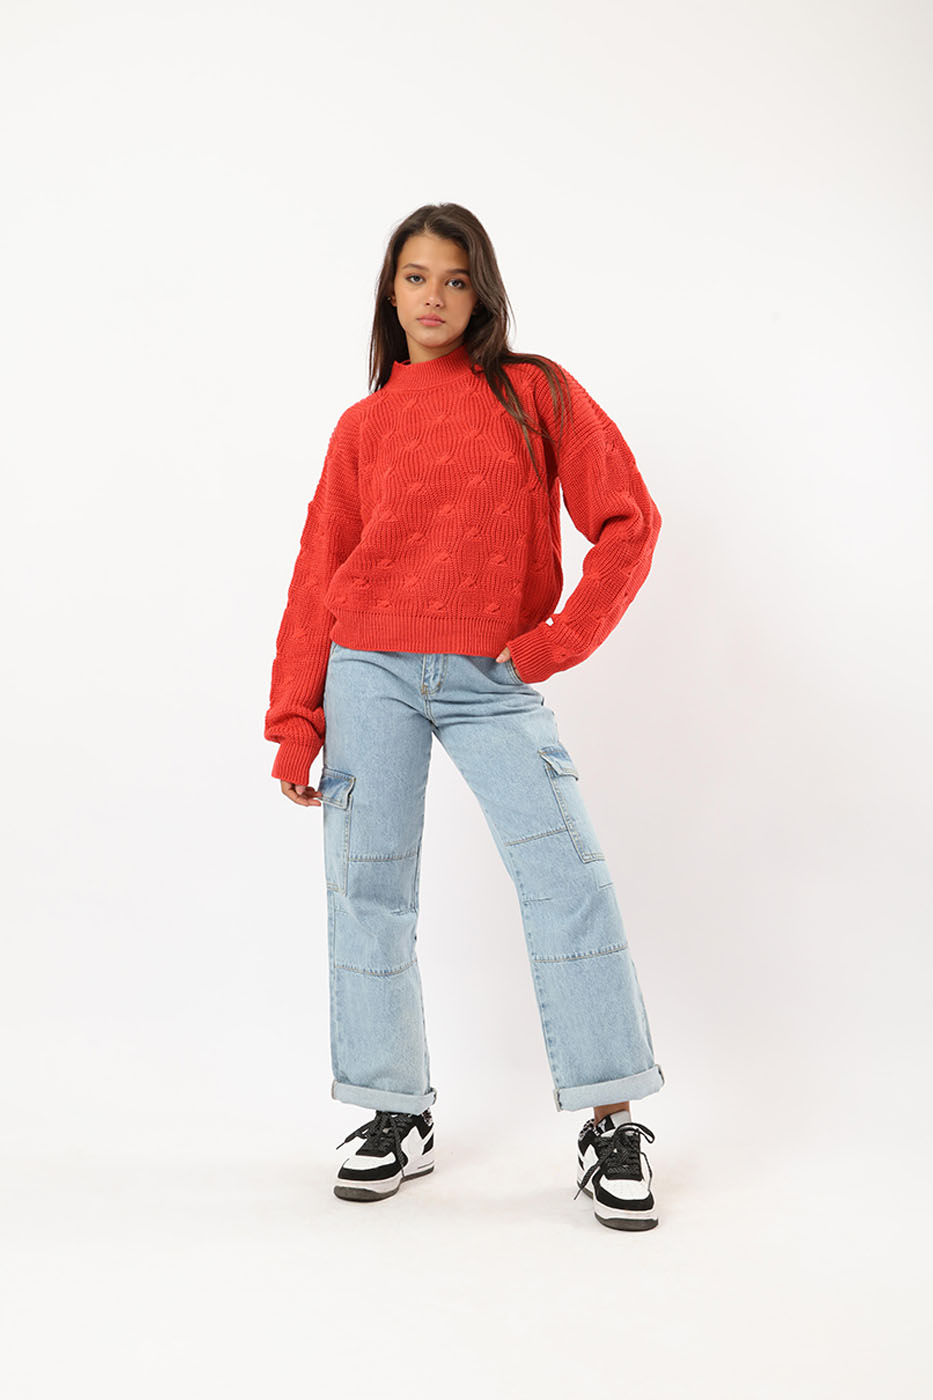 Crewneck Sweater In Red – FYI thumbnail